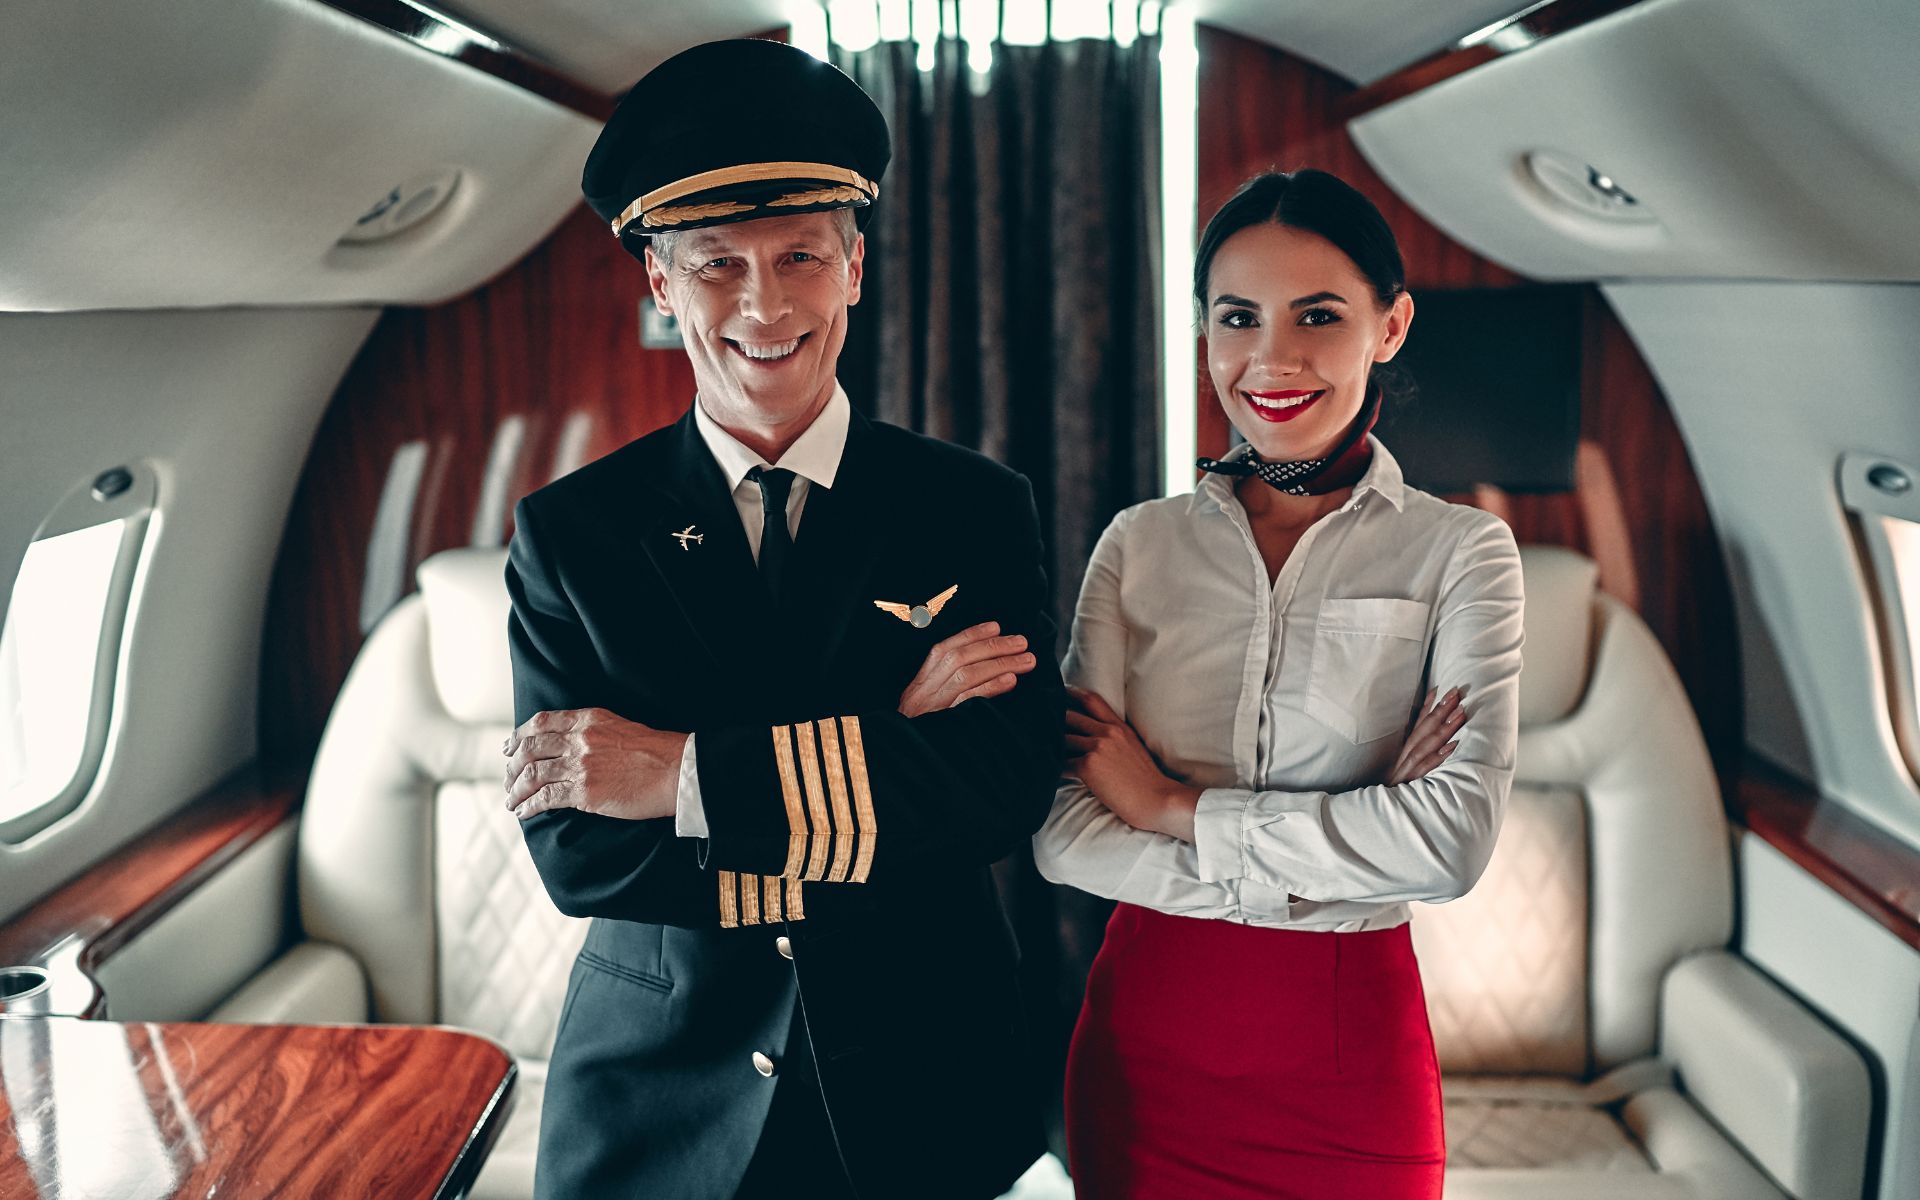 How To Become a Private Flight Attendant